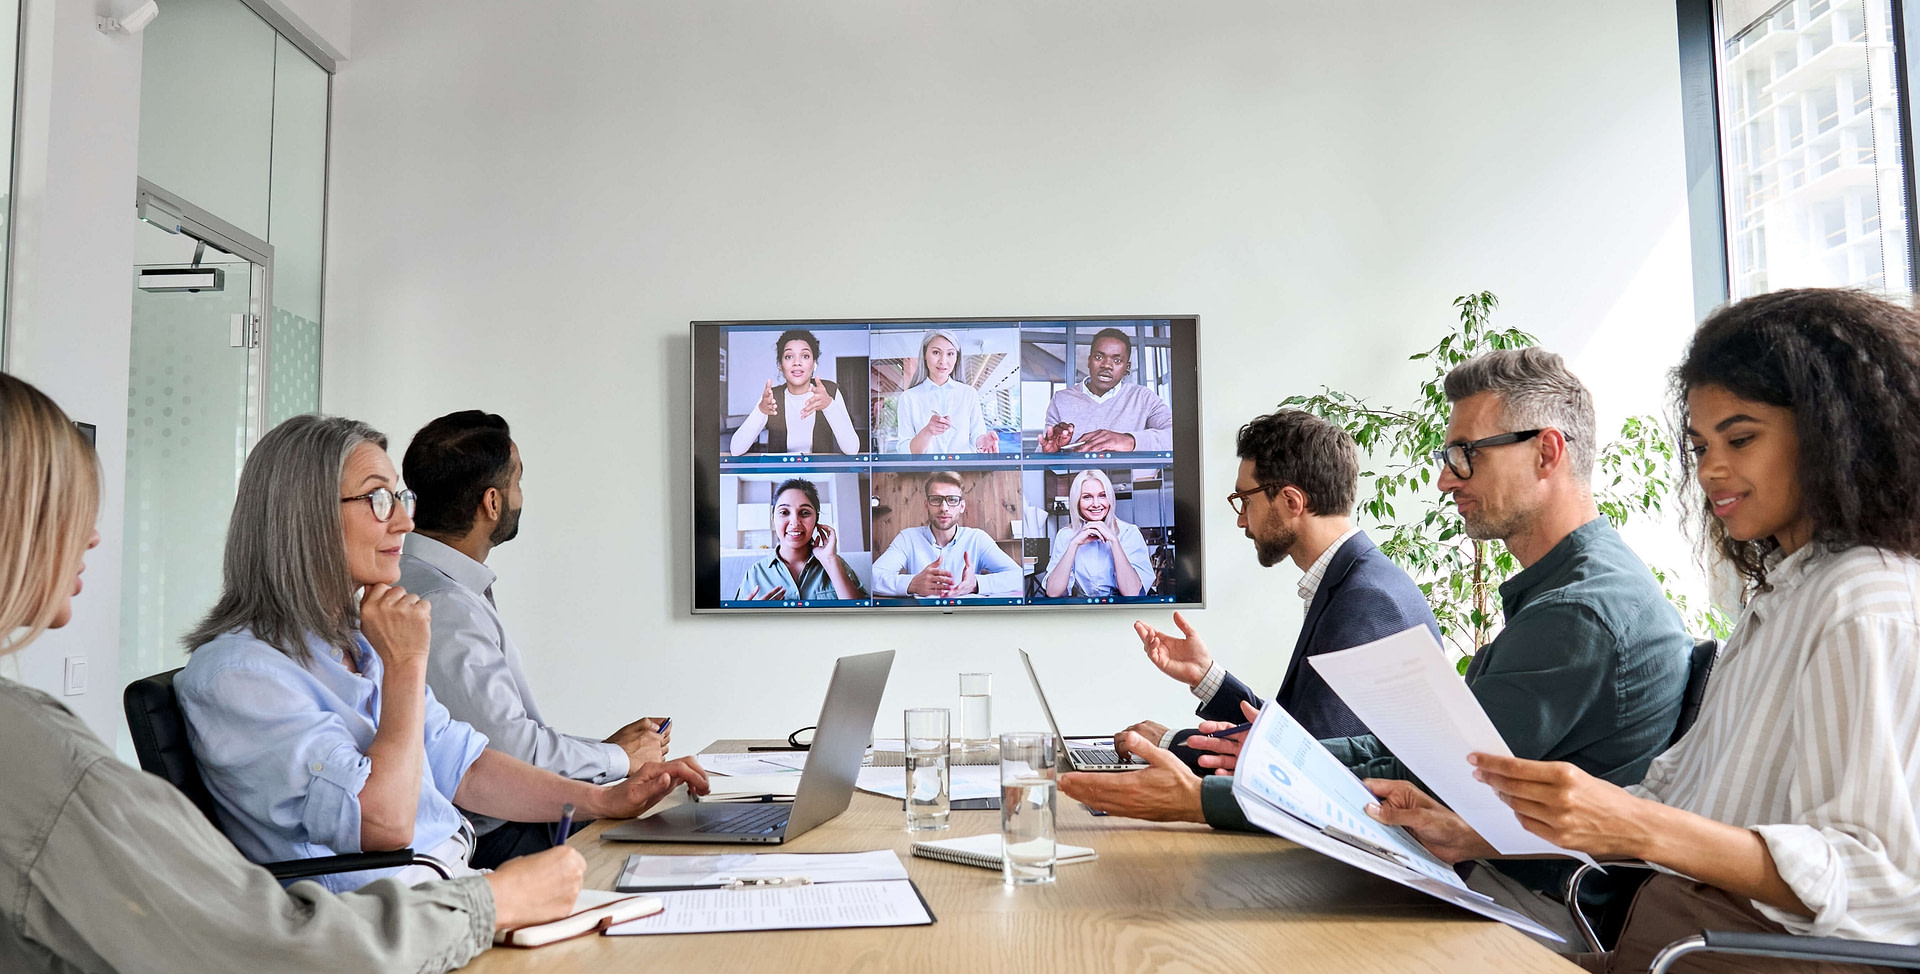 A group meeting with 12 diverse people. 6 of them are sat at a table and 6 are visible on a video conferencing screen.